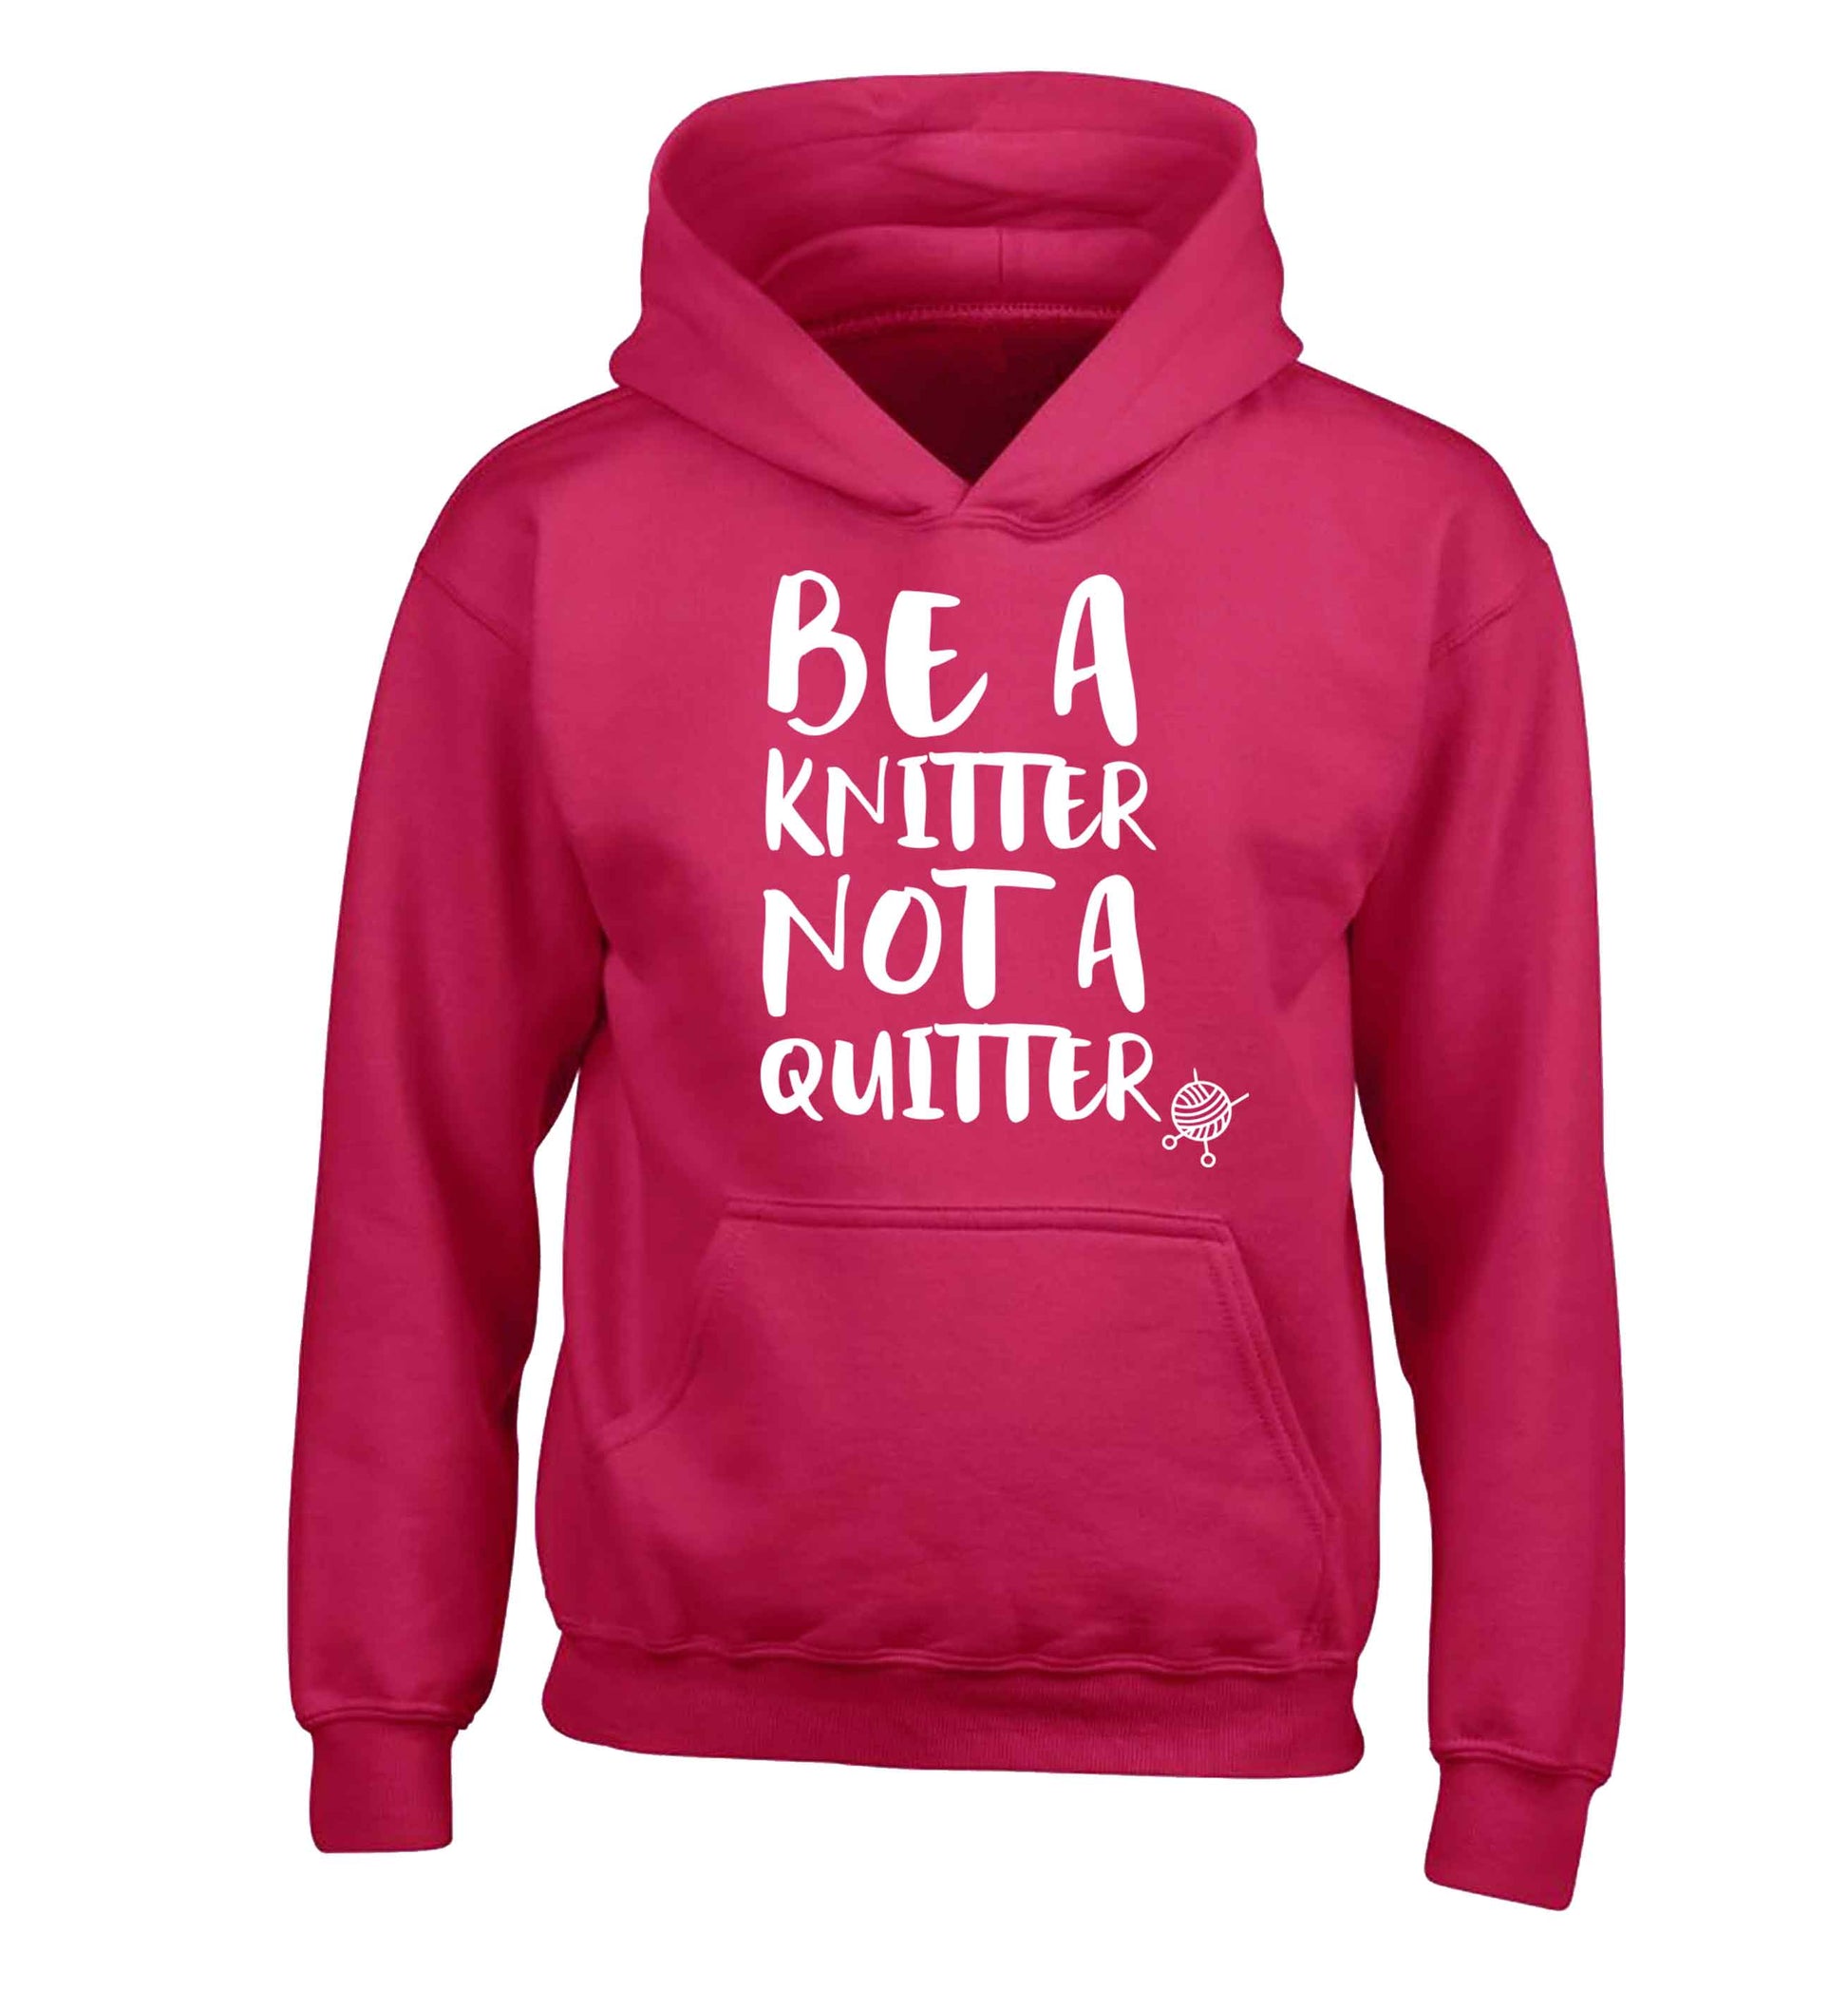 Be a knitter not a quitter children's pink hoodie 12-13 Years